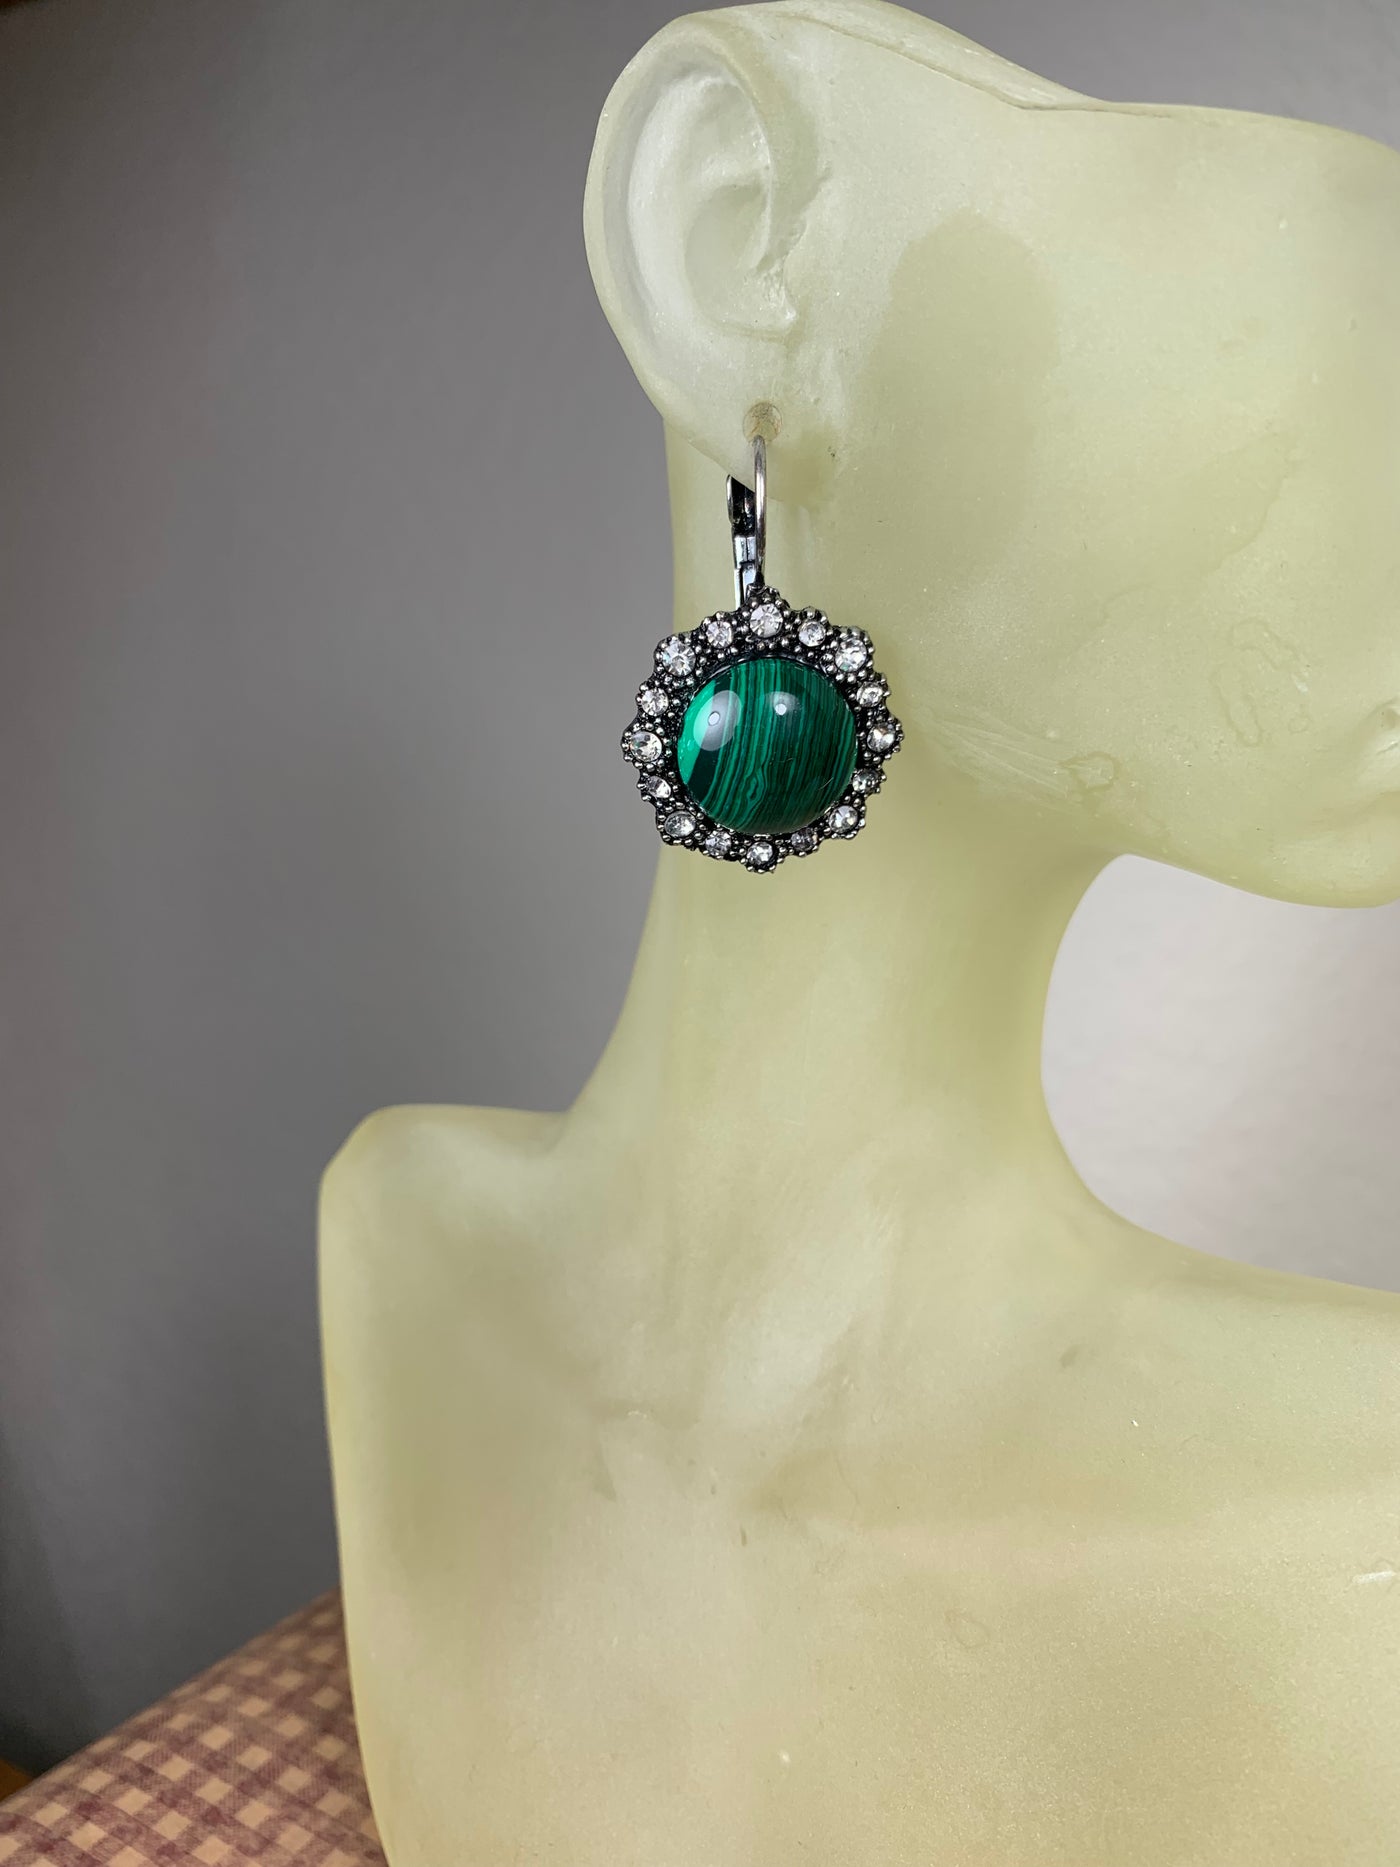 Round Reconstituted Dangling Earrings in Turquoise Malachite Gold Sand Stone & Amehtyst